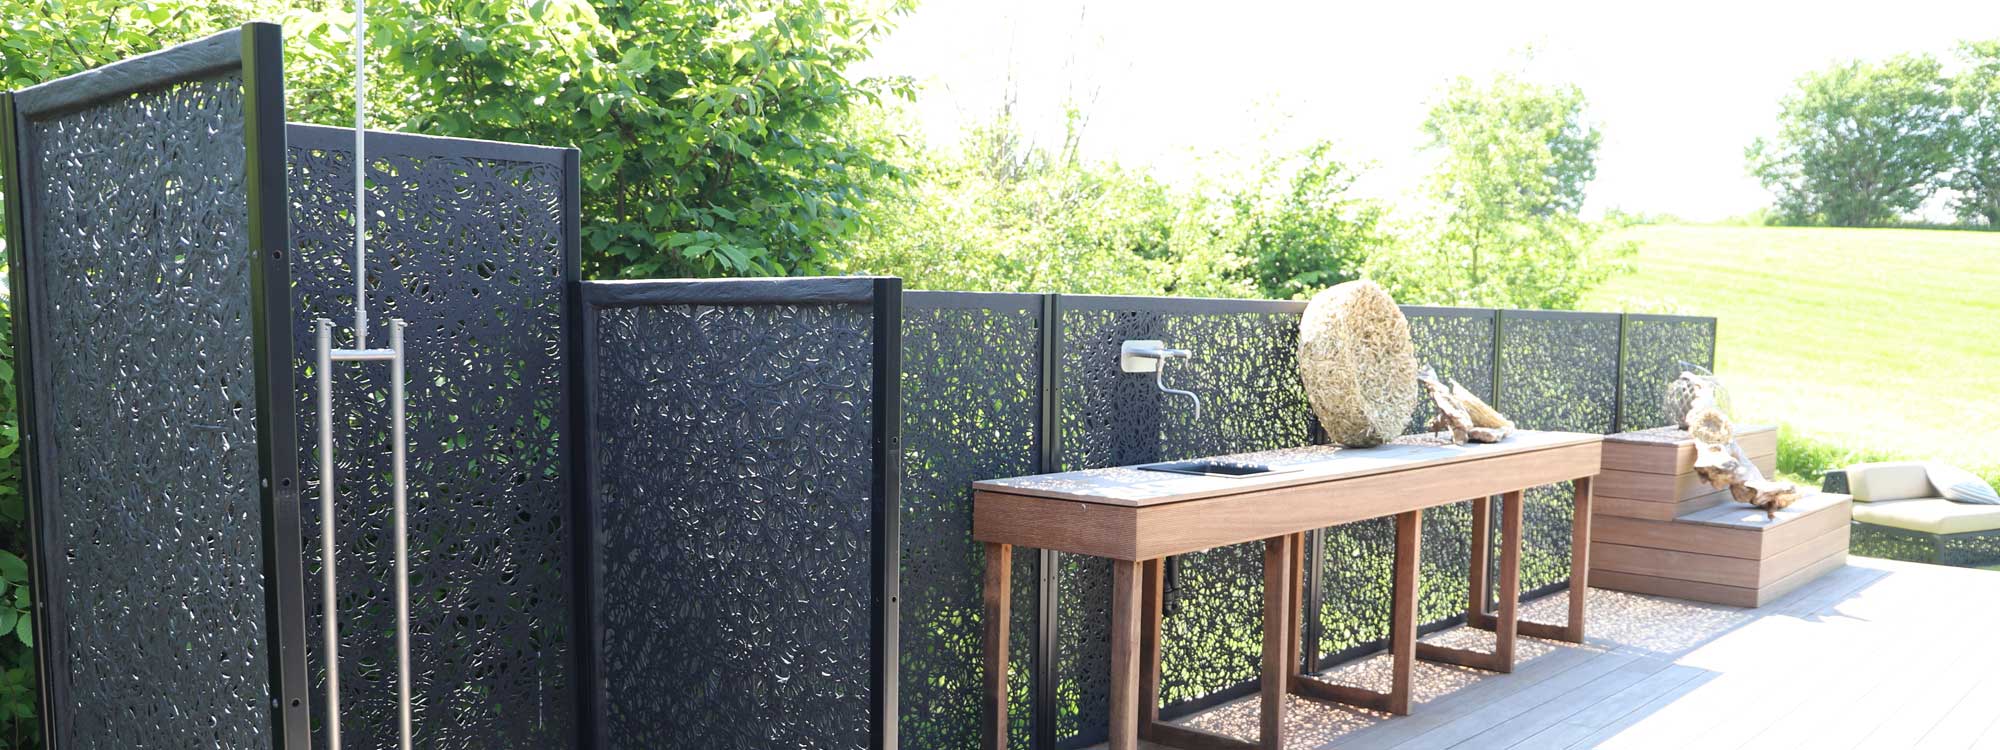 Image of Unknown Furniture Lava panels enclosing a garden shower next to a garden kitchen with lava panel wall behind it